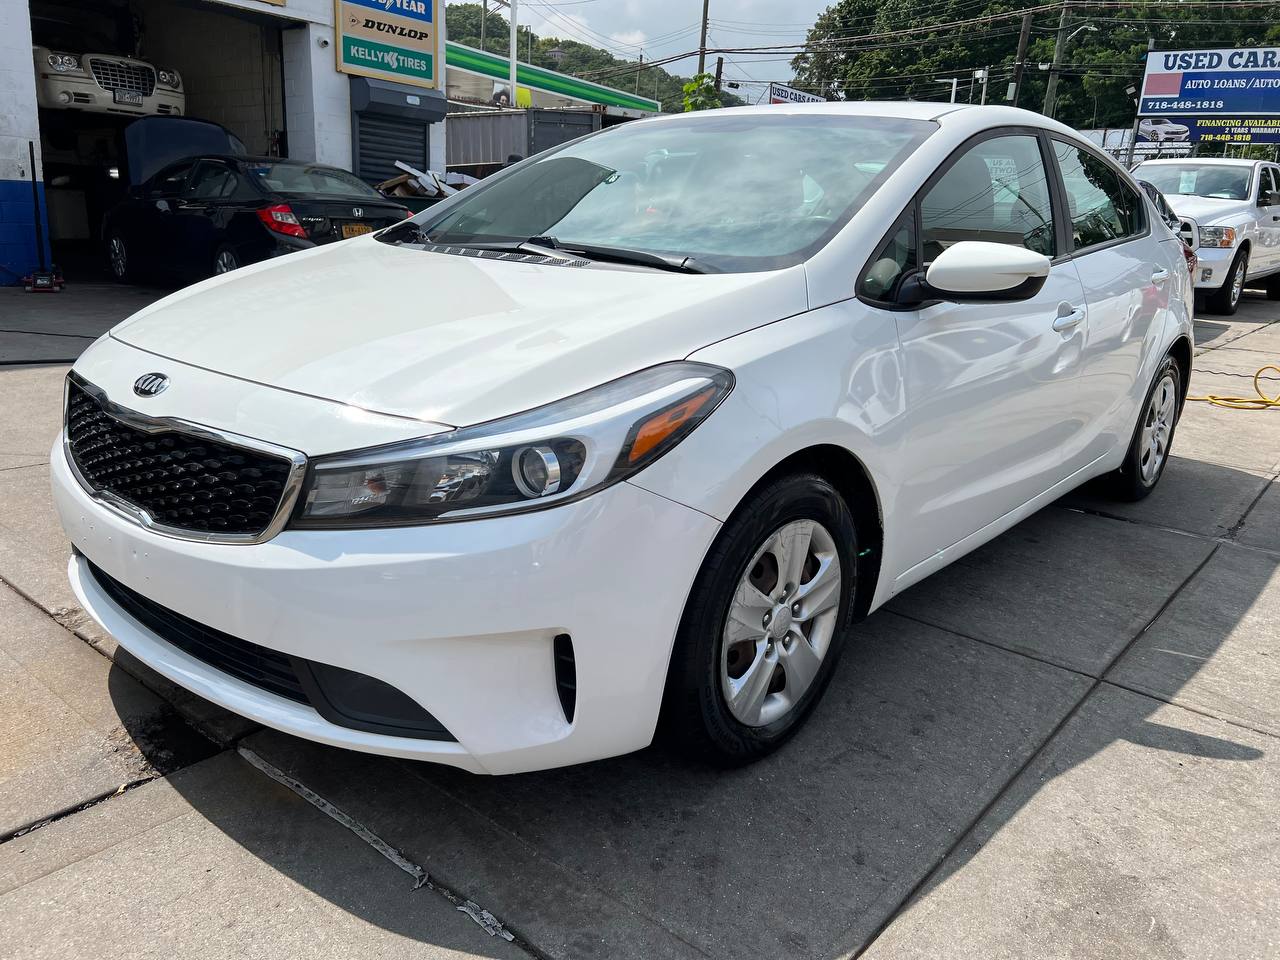 Used Car - 2017 Kia Forte LX for Sale in Staten Island, NY